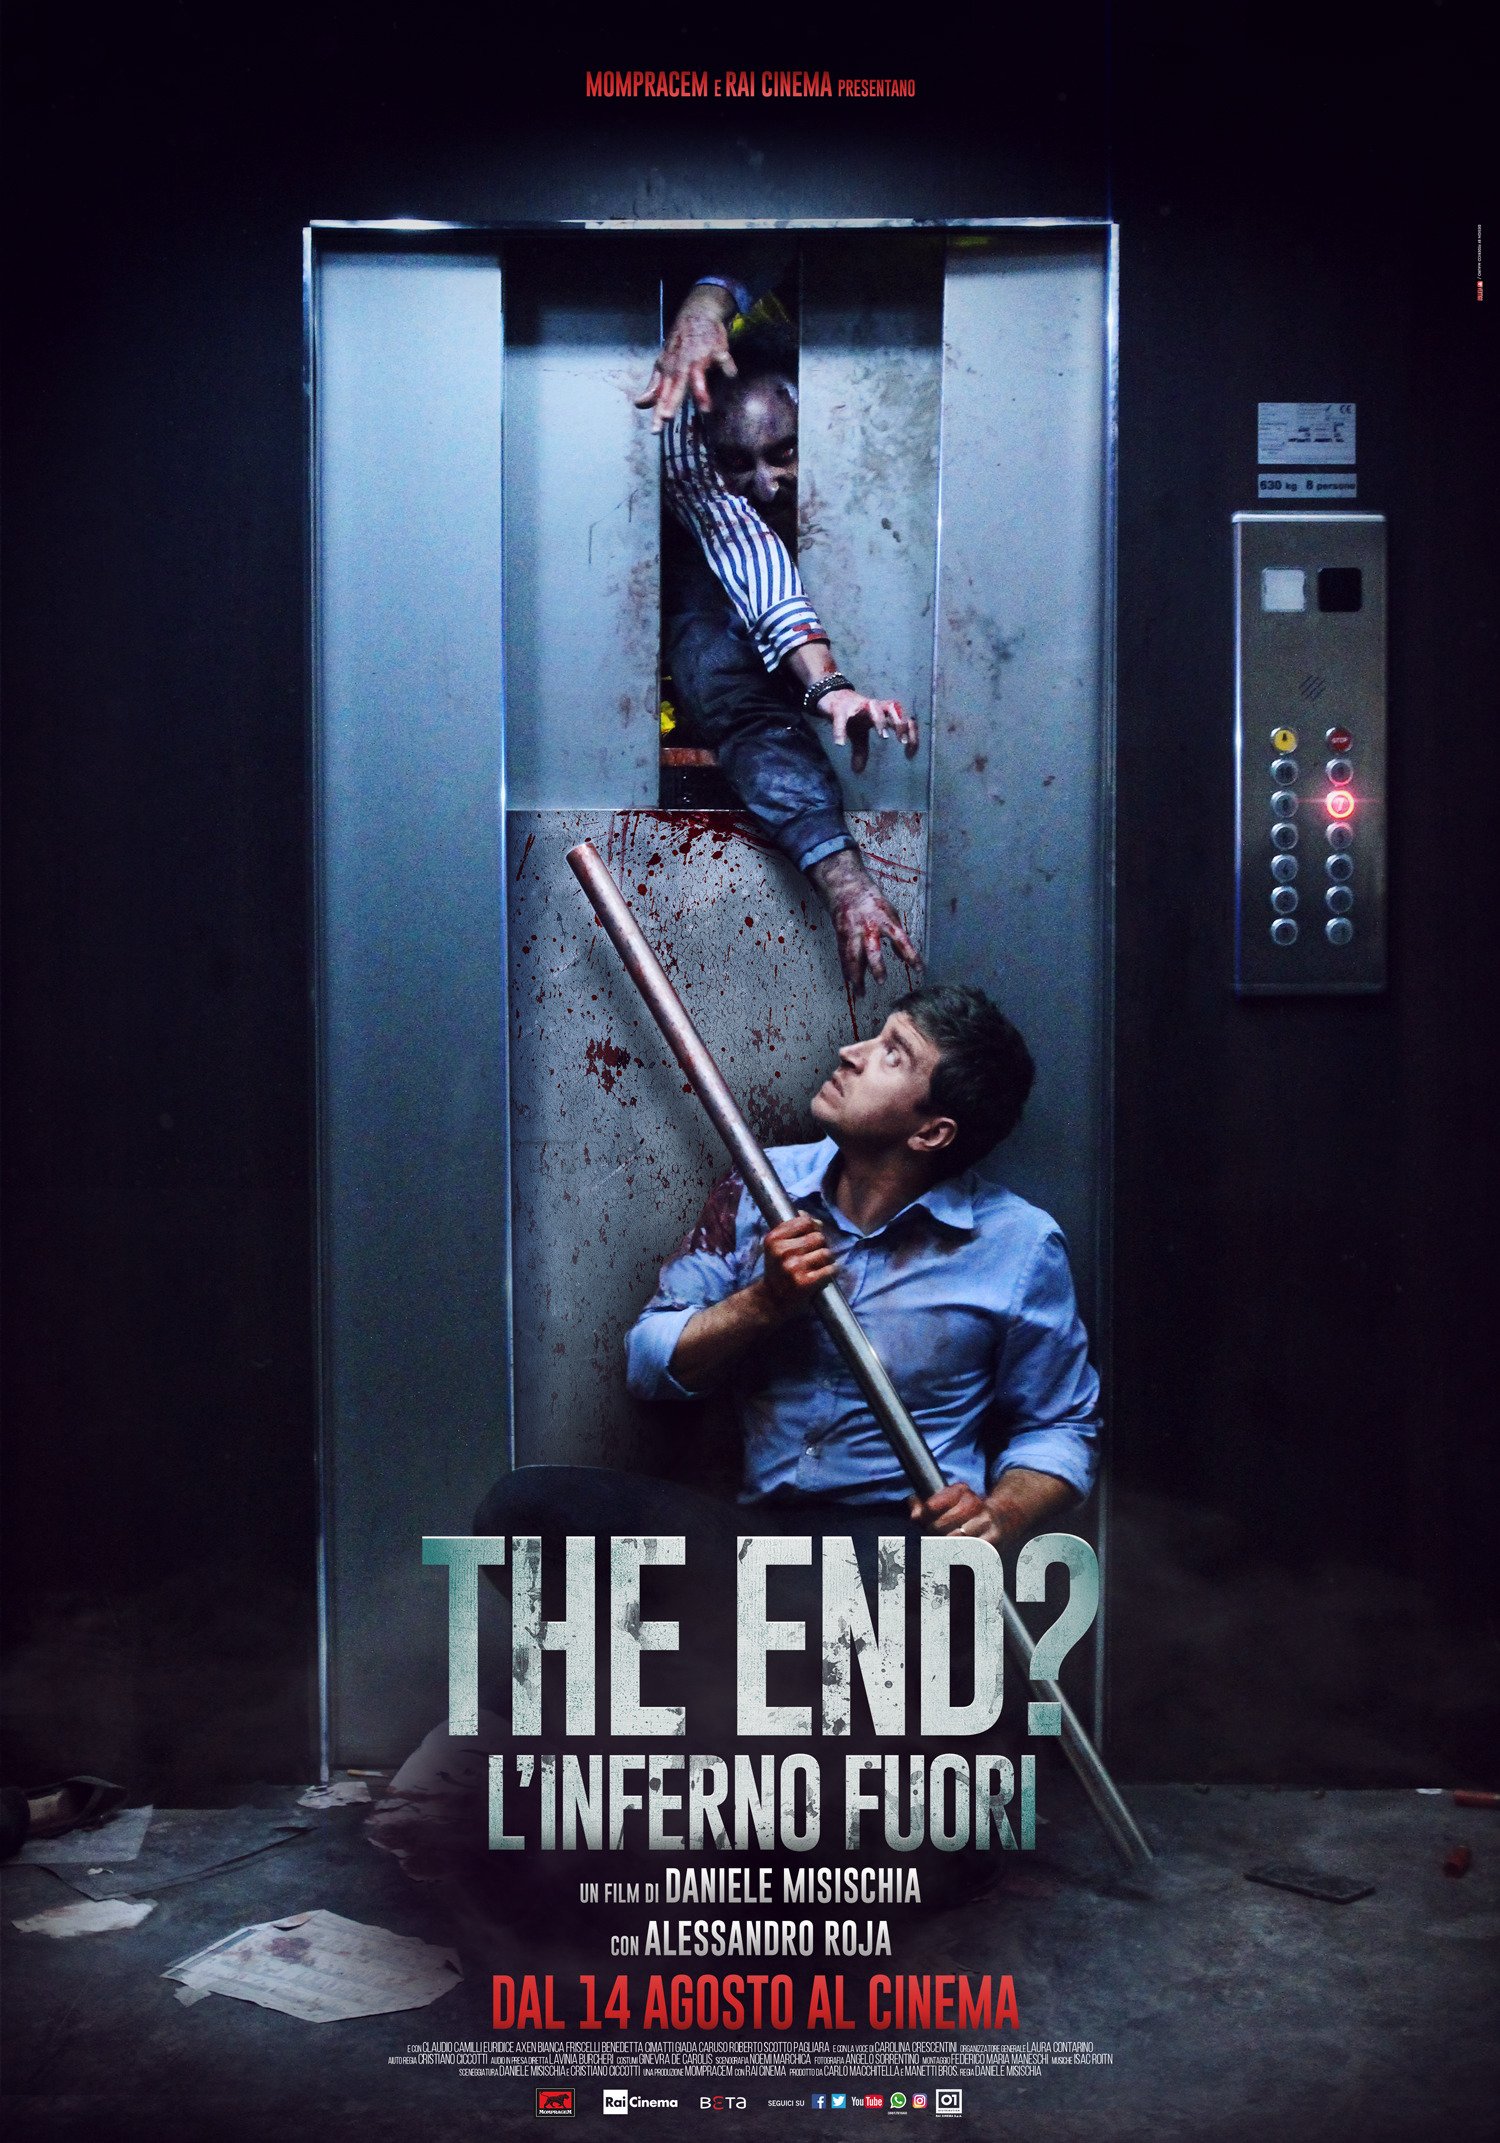 Mega Sized Movie Poster Image for The End? L'inferno fuori 